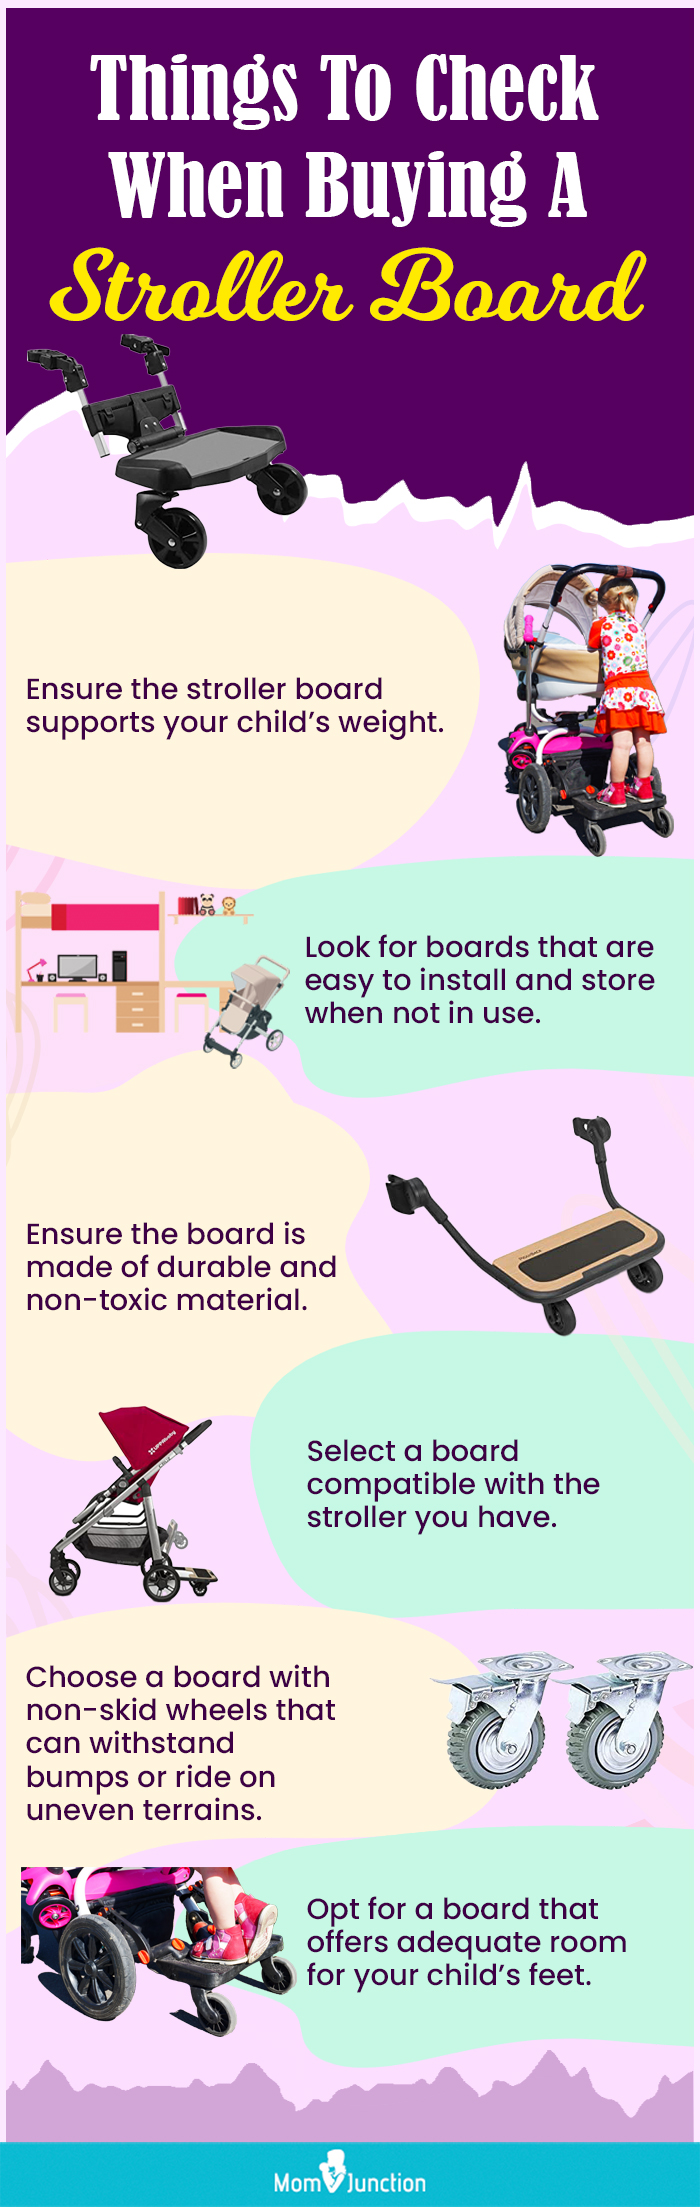 Things To Check When Buying A Stroller Board (Infographic)